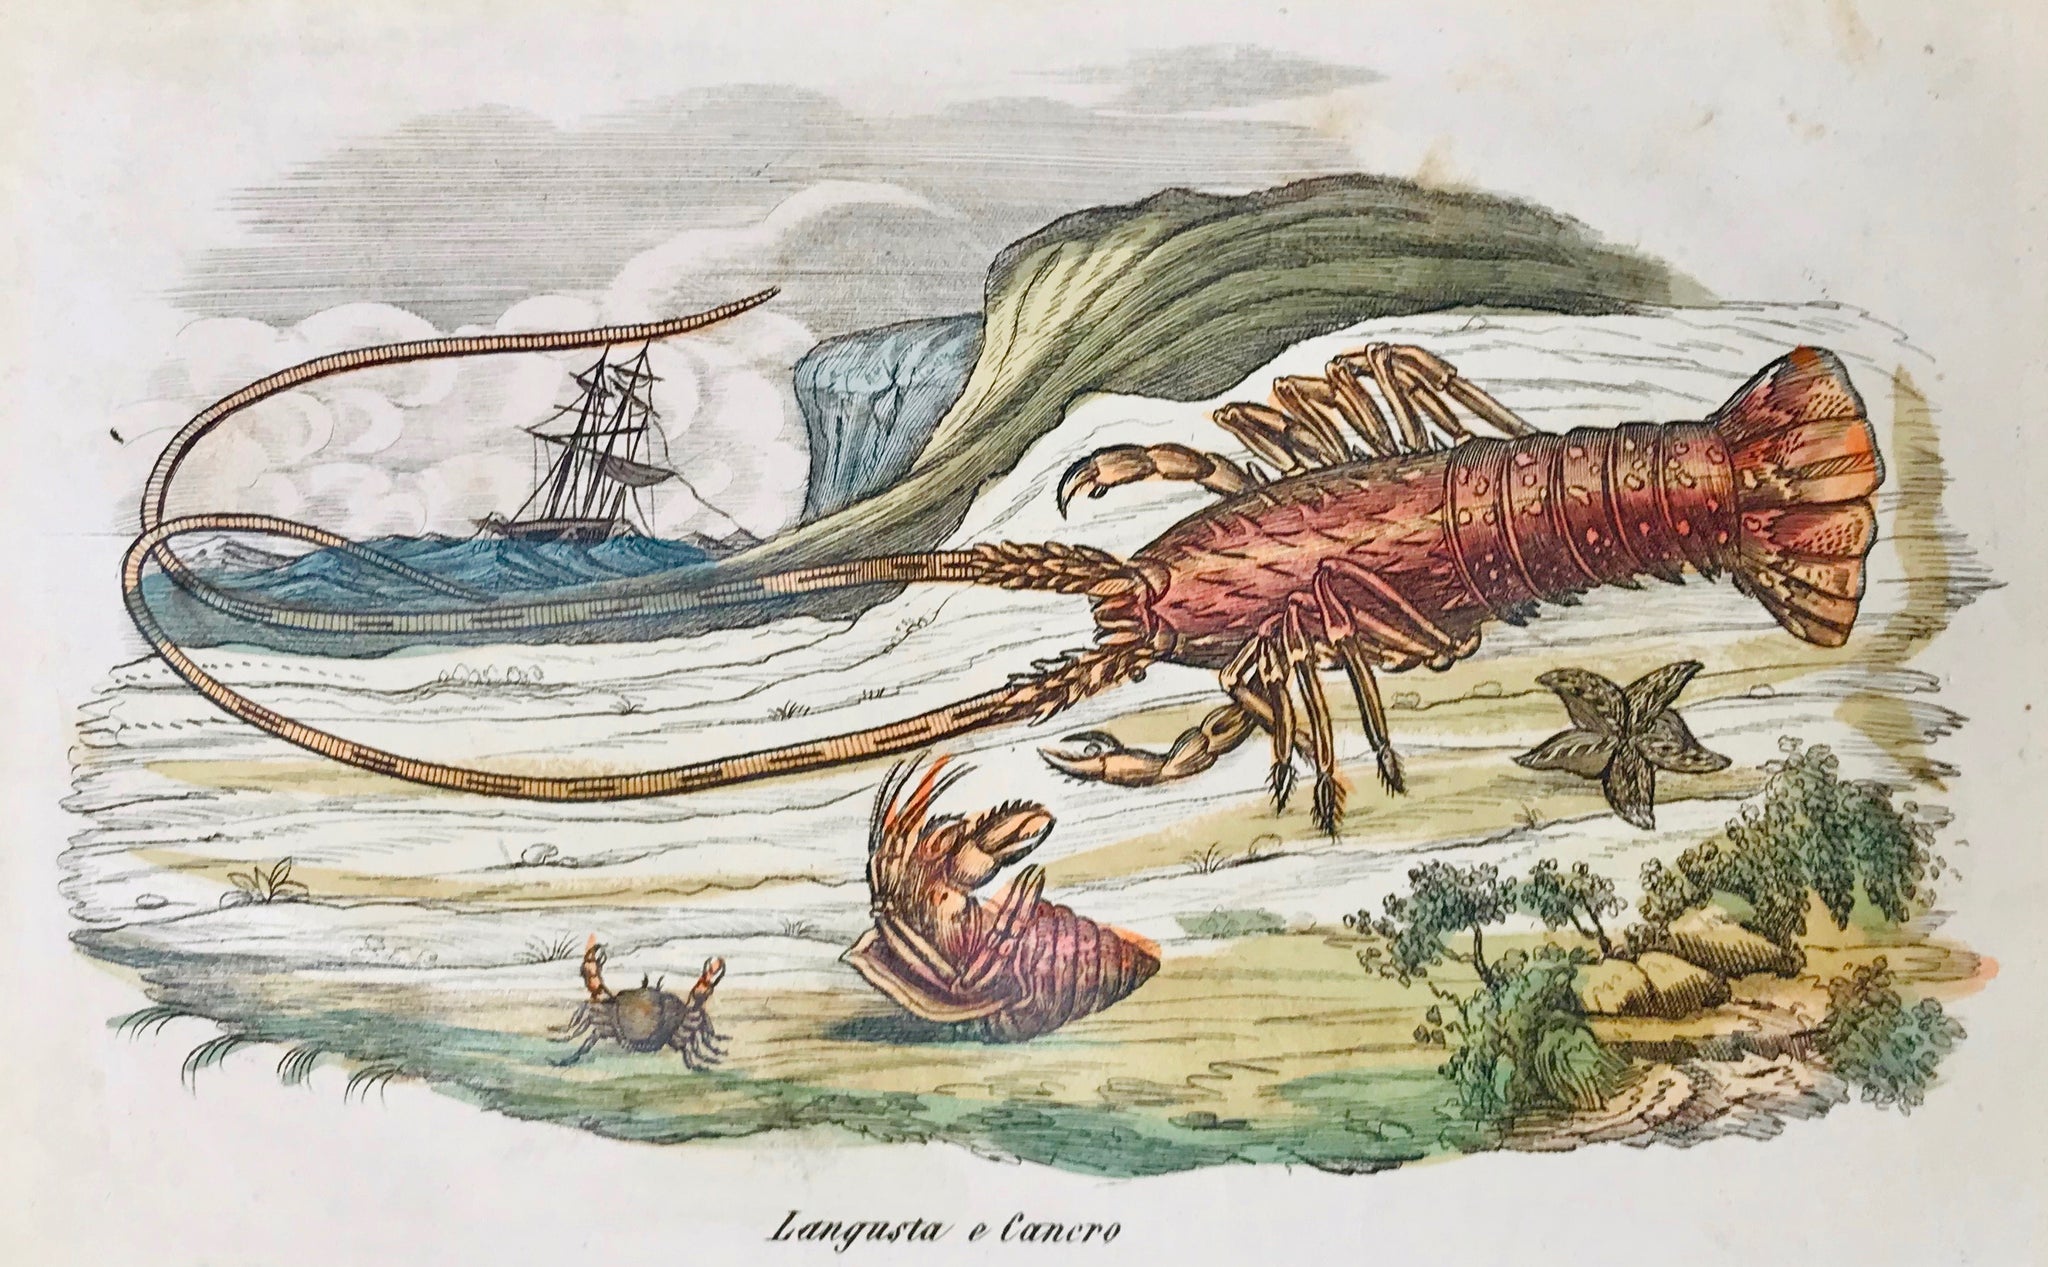 "Langusta e cancero" - Crawfish and Crabs.  Originally hand-colored etching by an anonymous artist.  Italian, ca. 1860. A few signs of age and use..  12 x 19 cm (ca. 4.7 x 7.5")